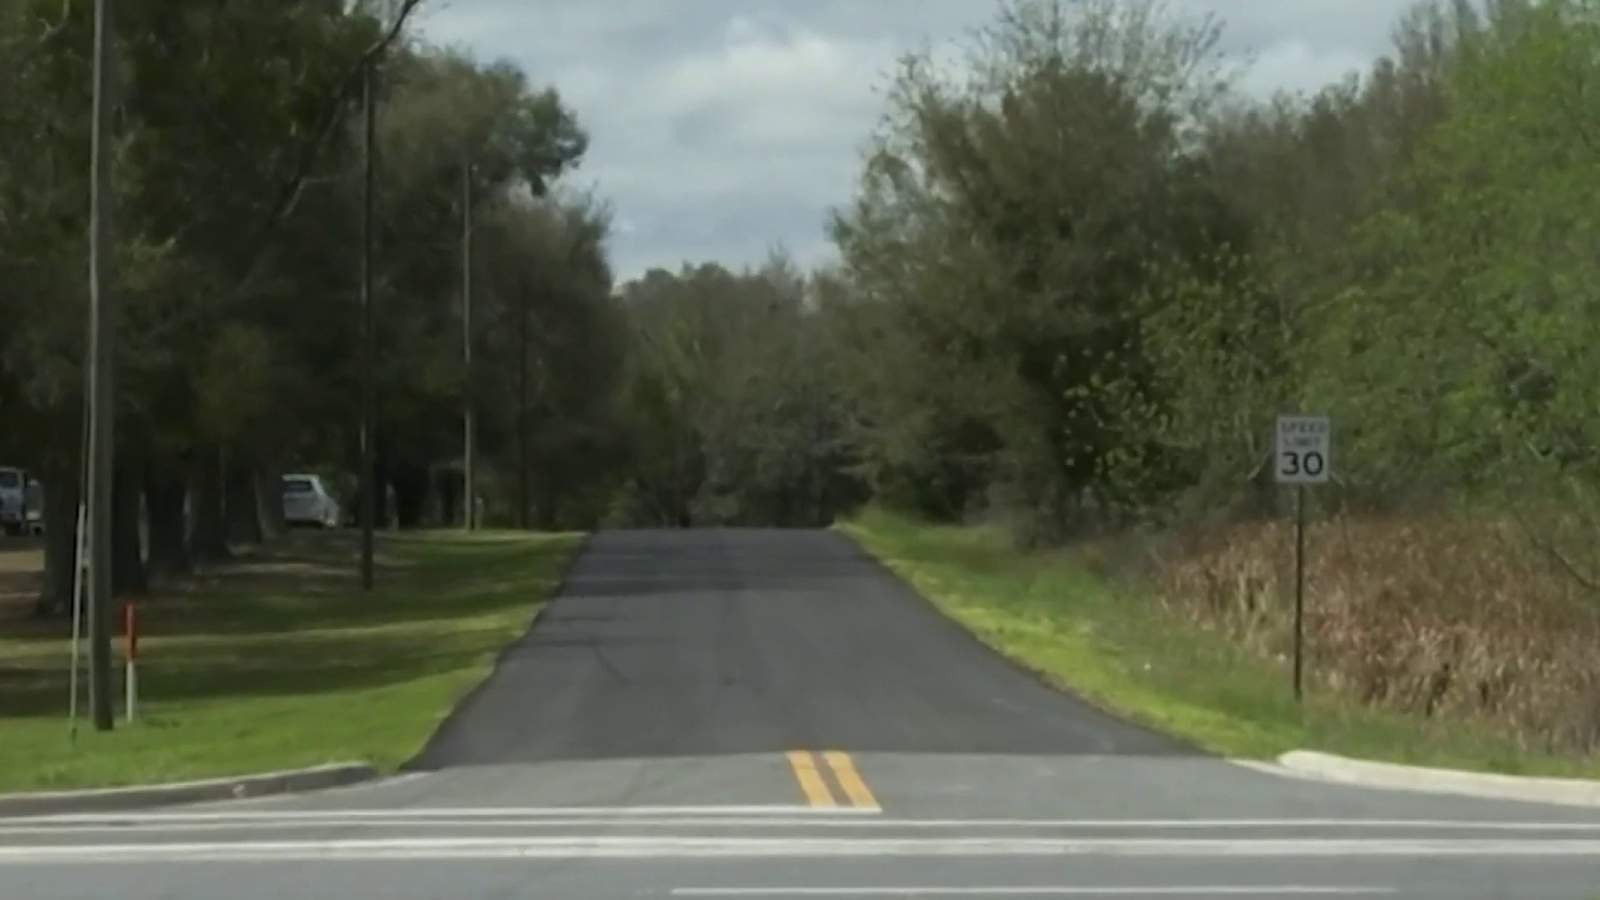 Kidnapping victim raped, left on side of Marion County road, deputies say